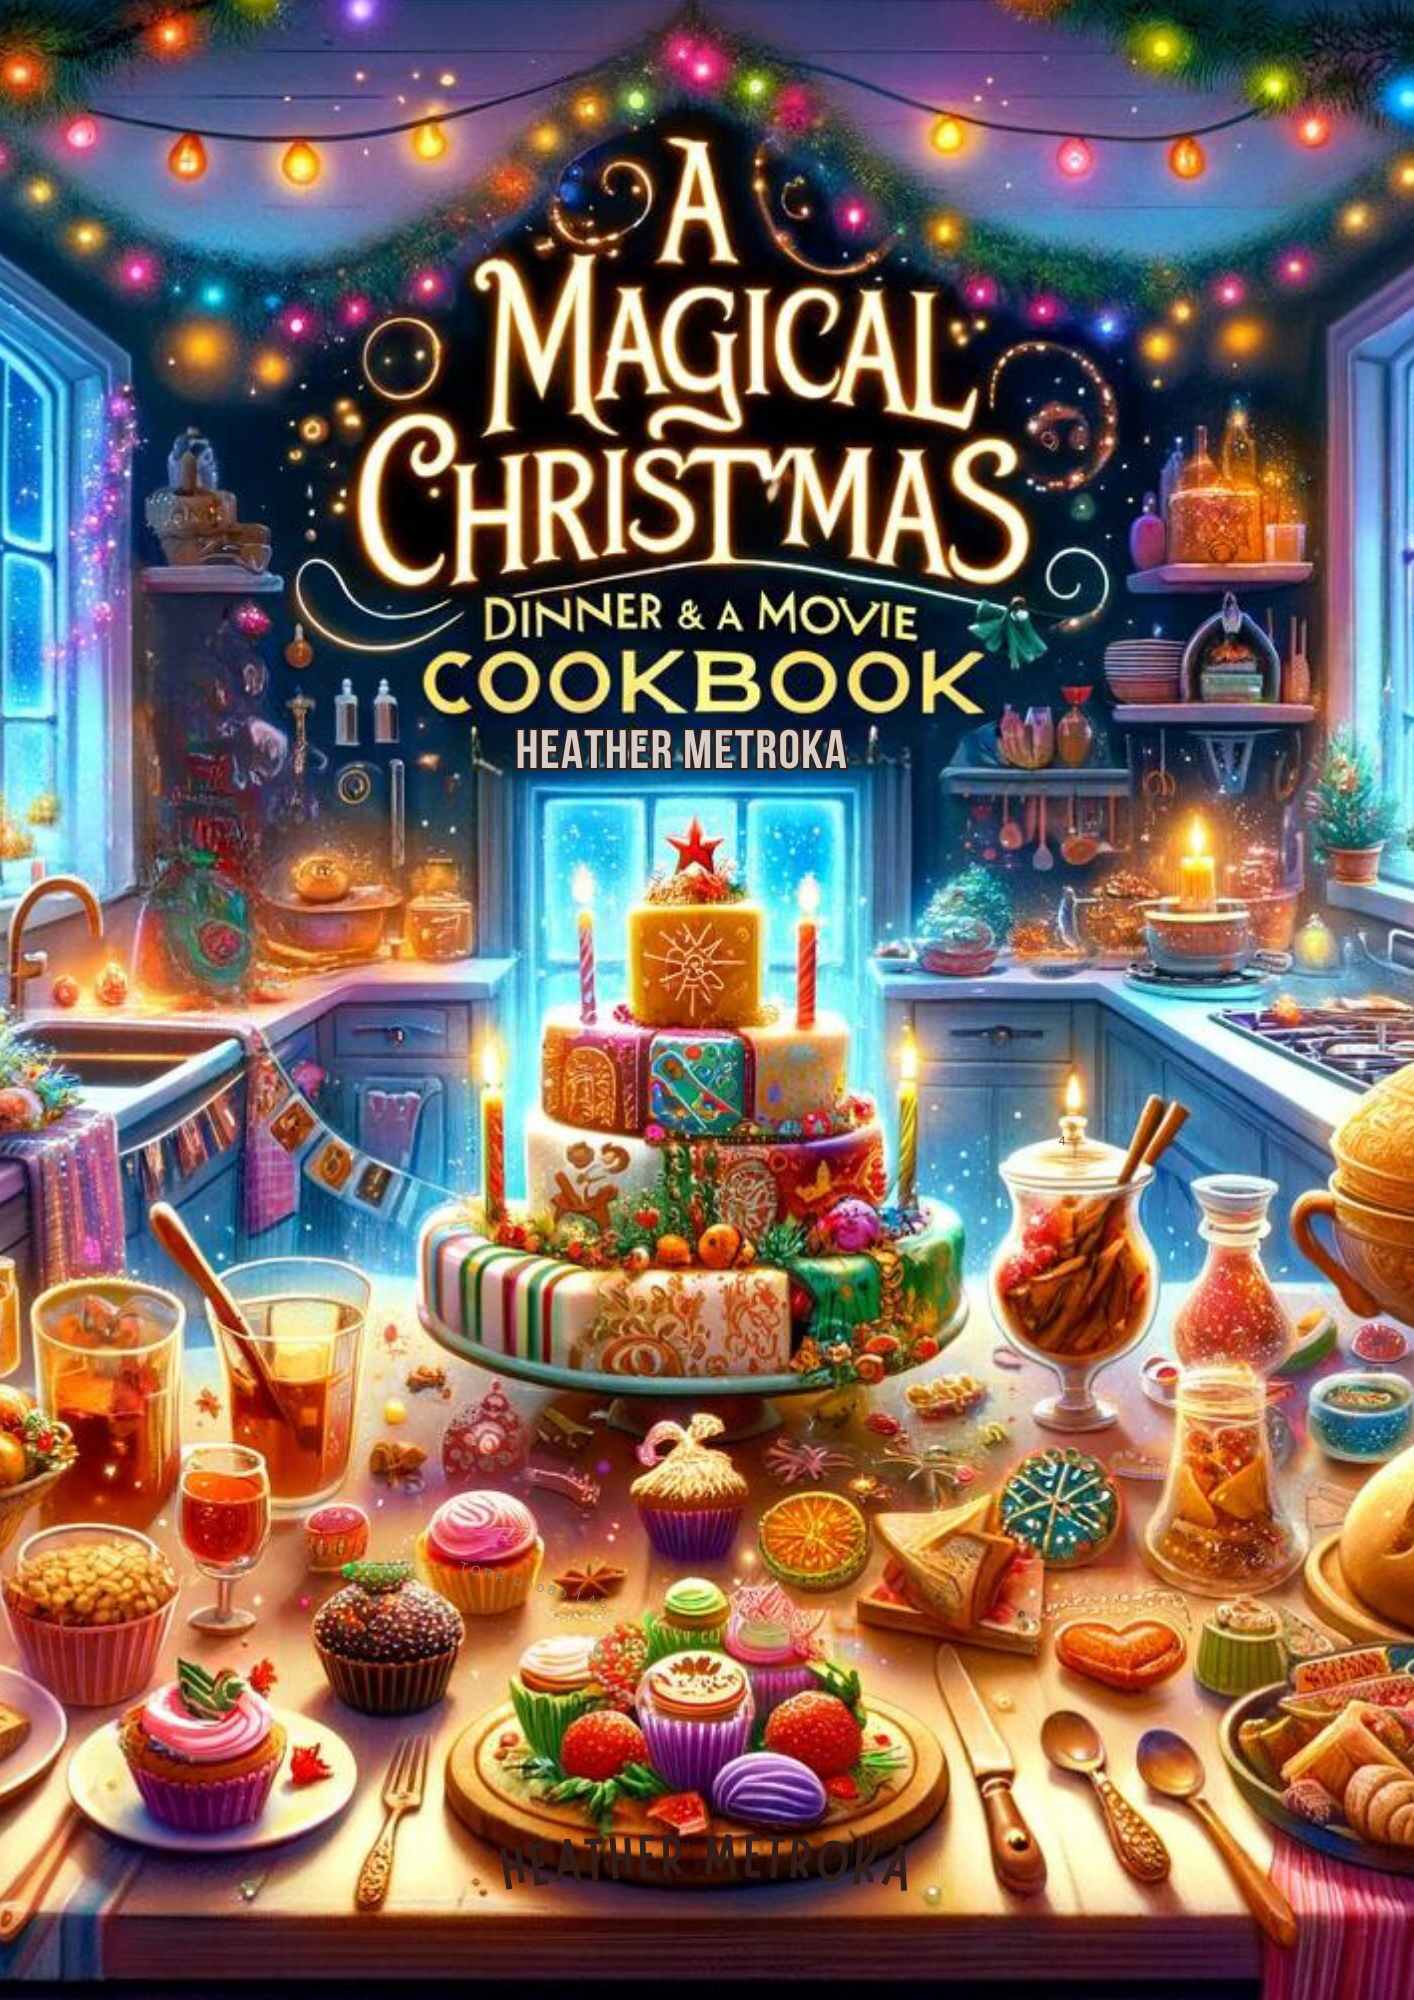 The Magical Christmas Dinner and a Movie Cookbook 